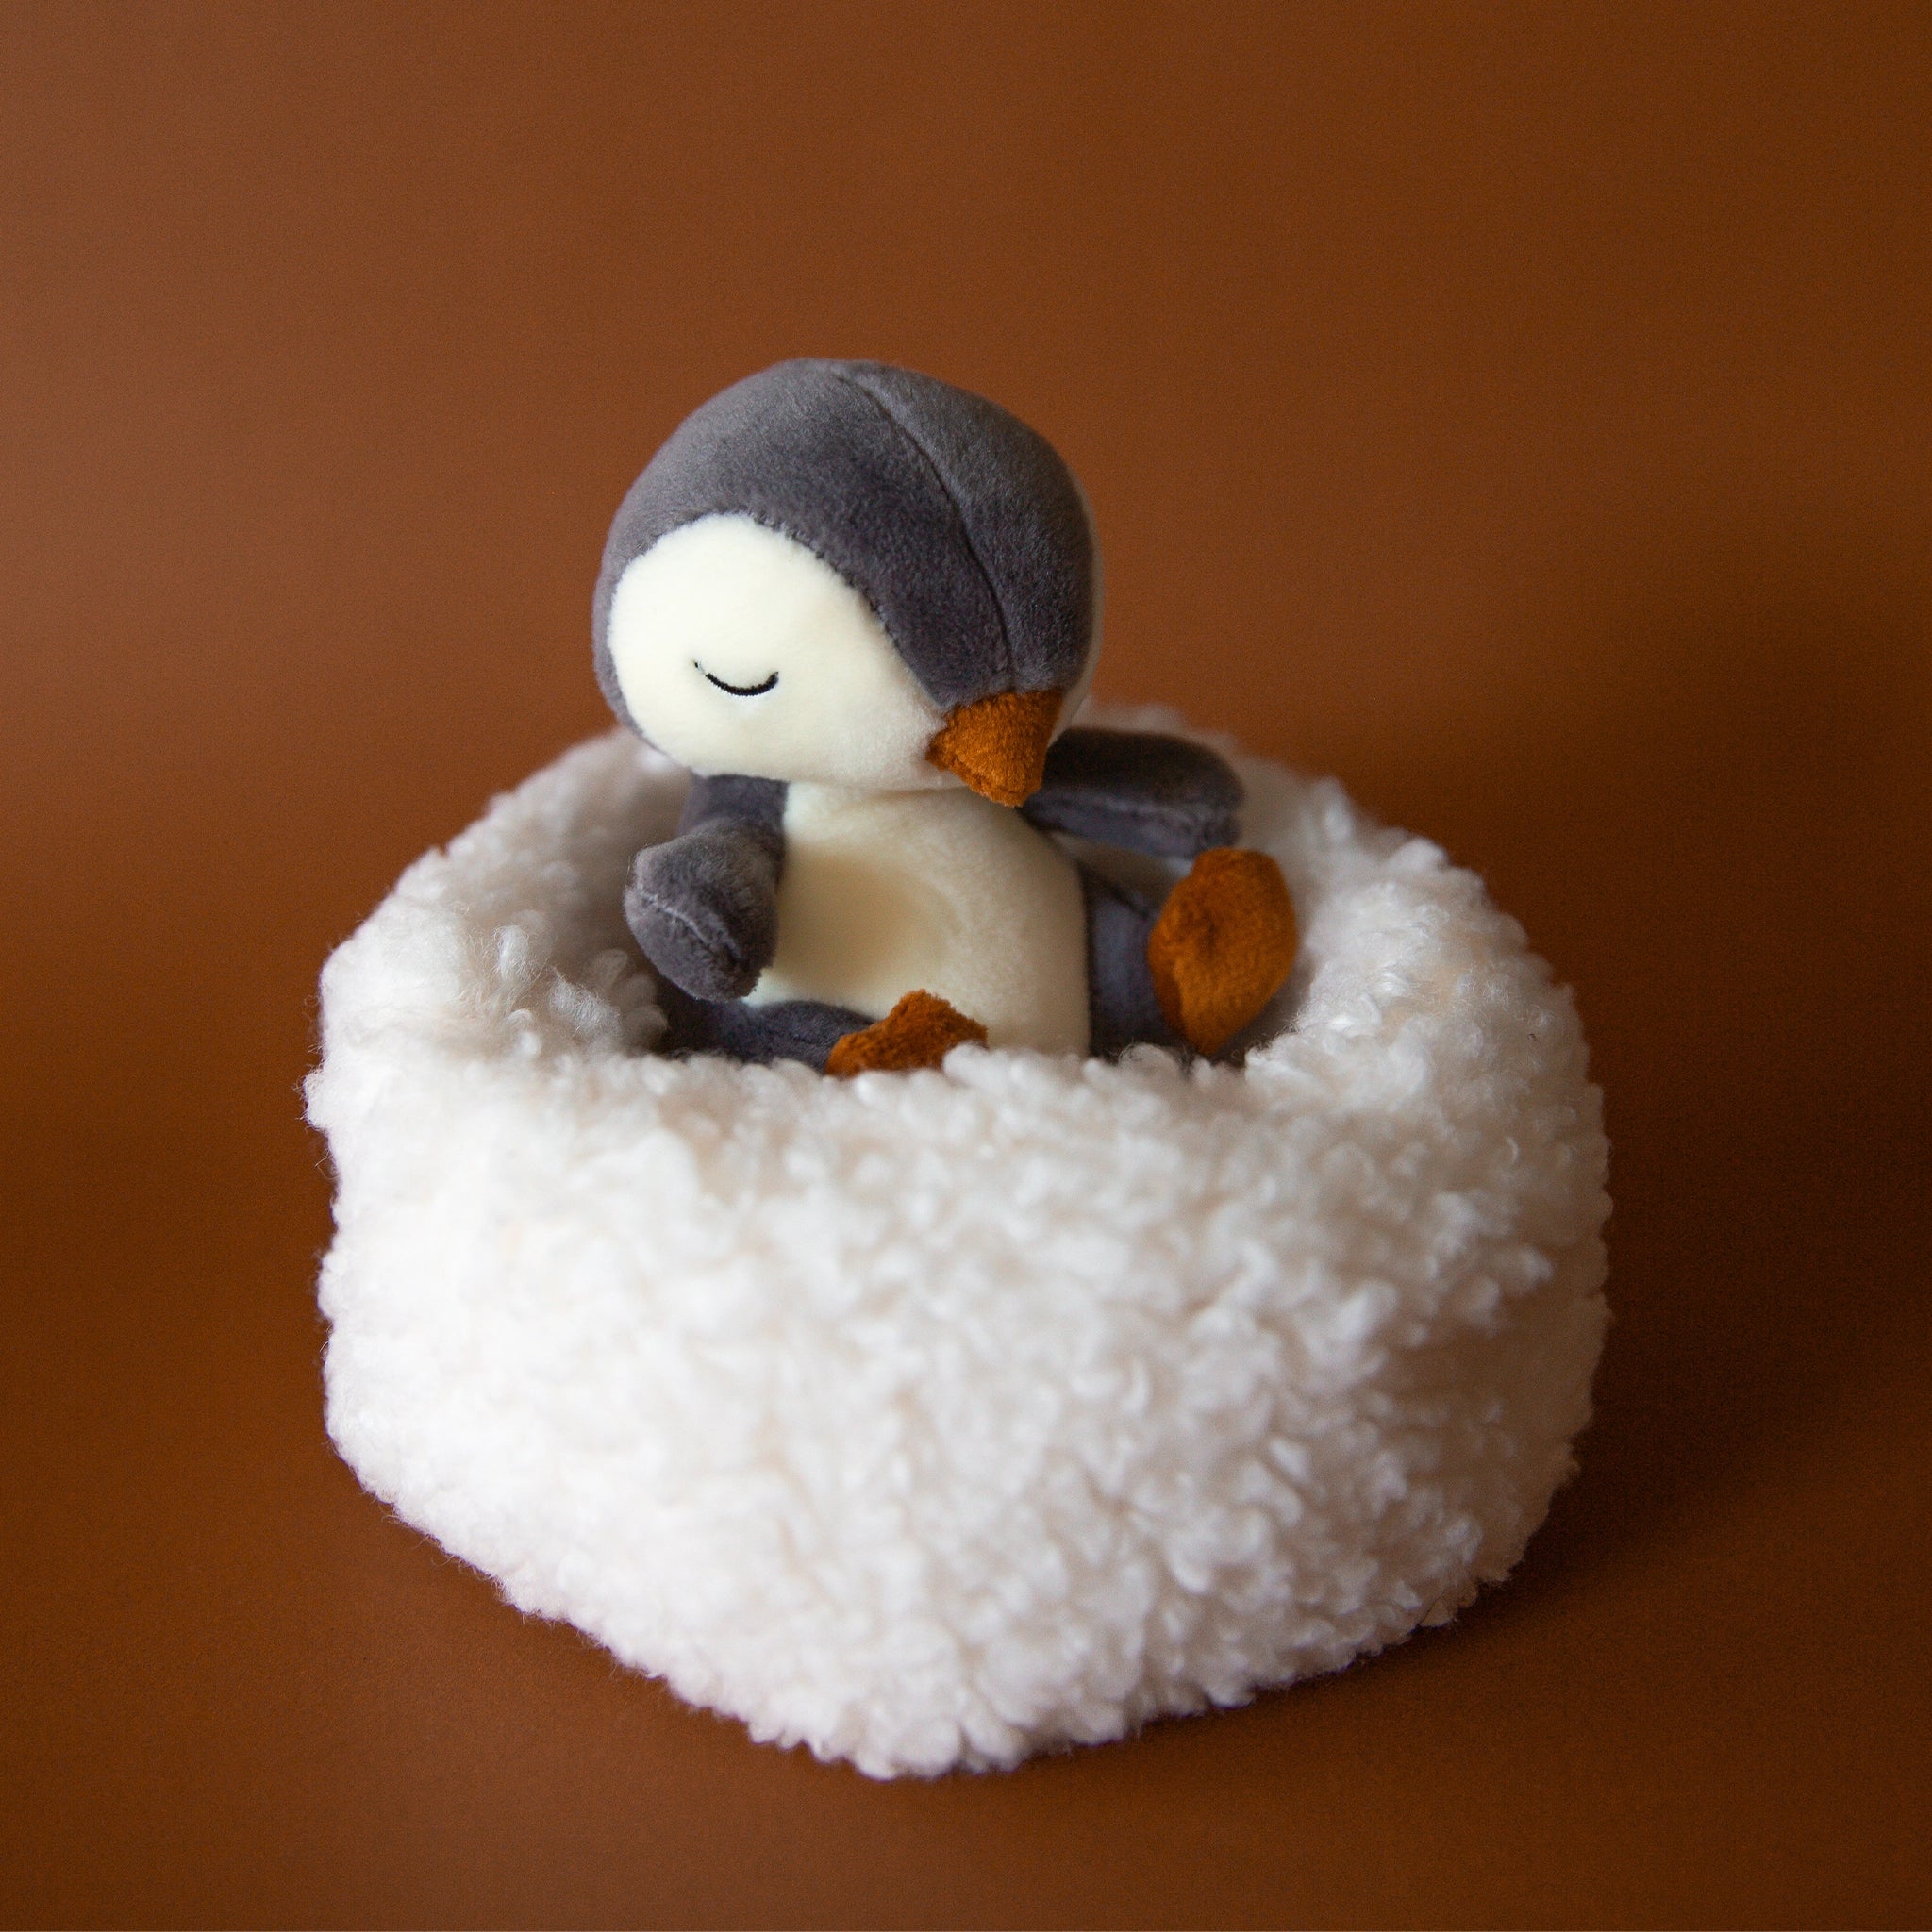 On a brown background is a penguin stuffed animal with a white boucle bed.